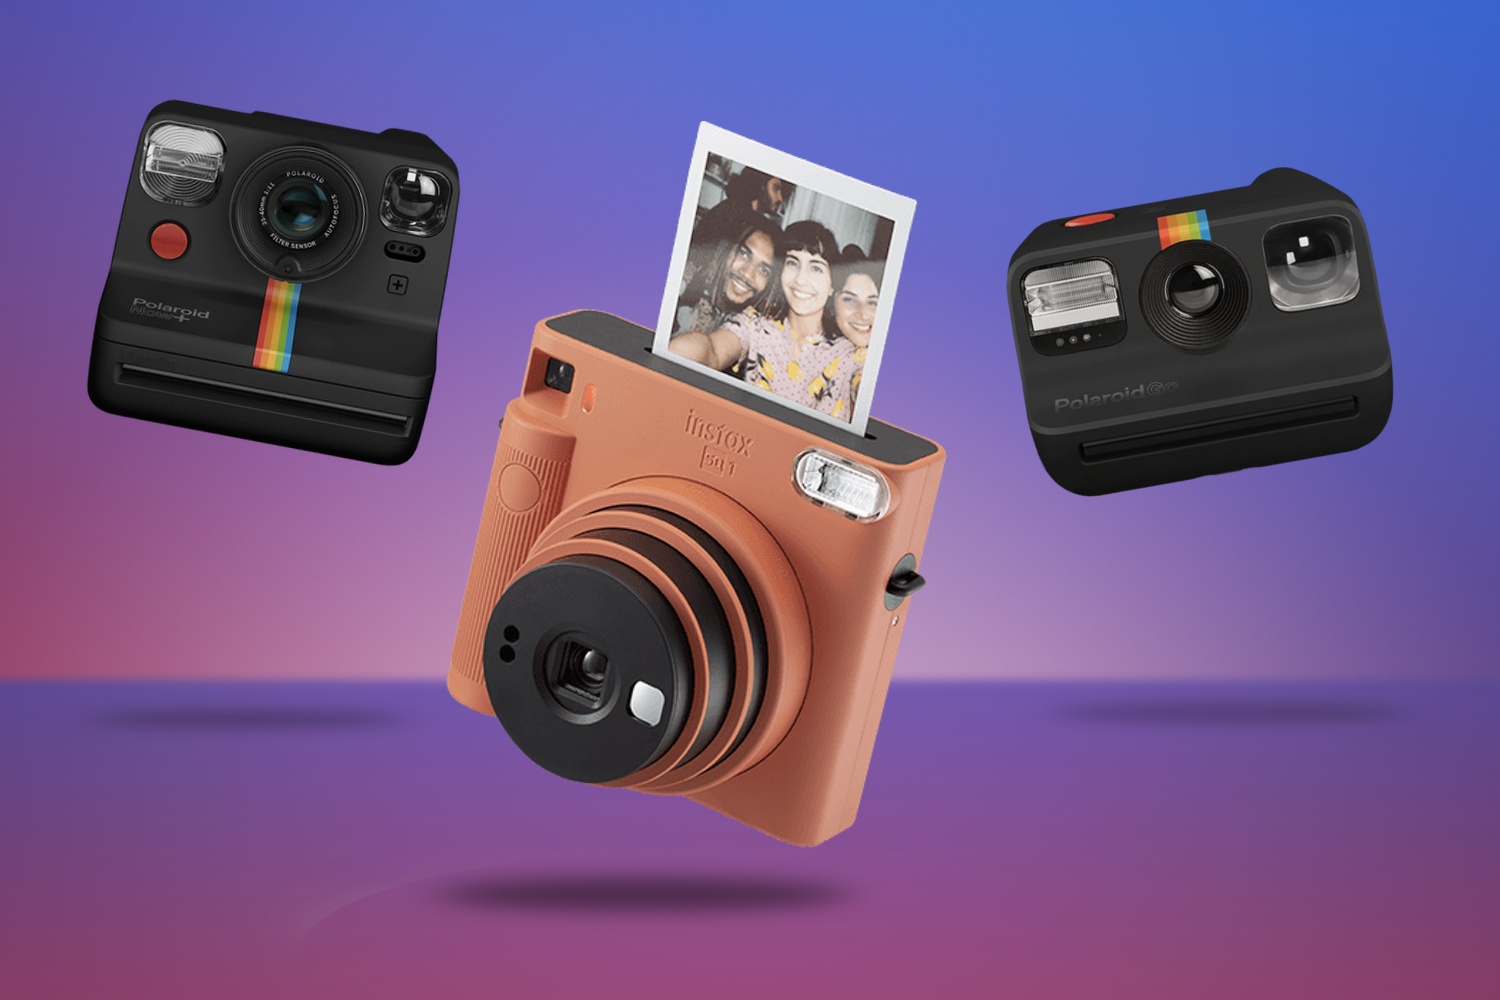 Review: The new LEGO® Polaroid Camera is perfect – except for one